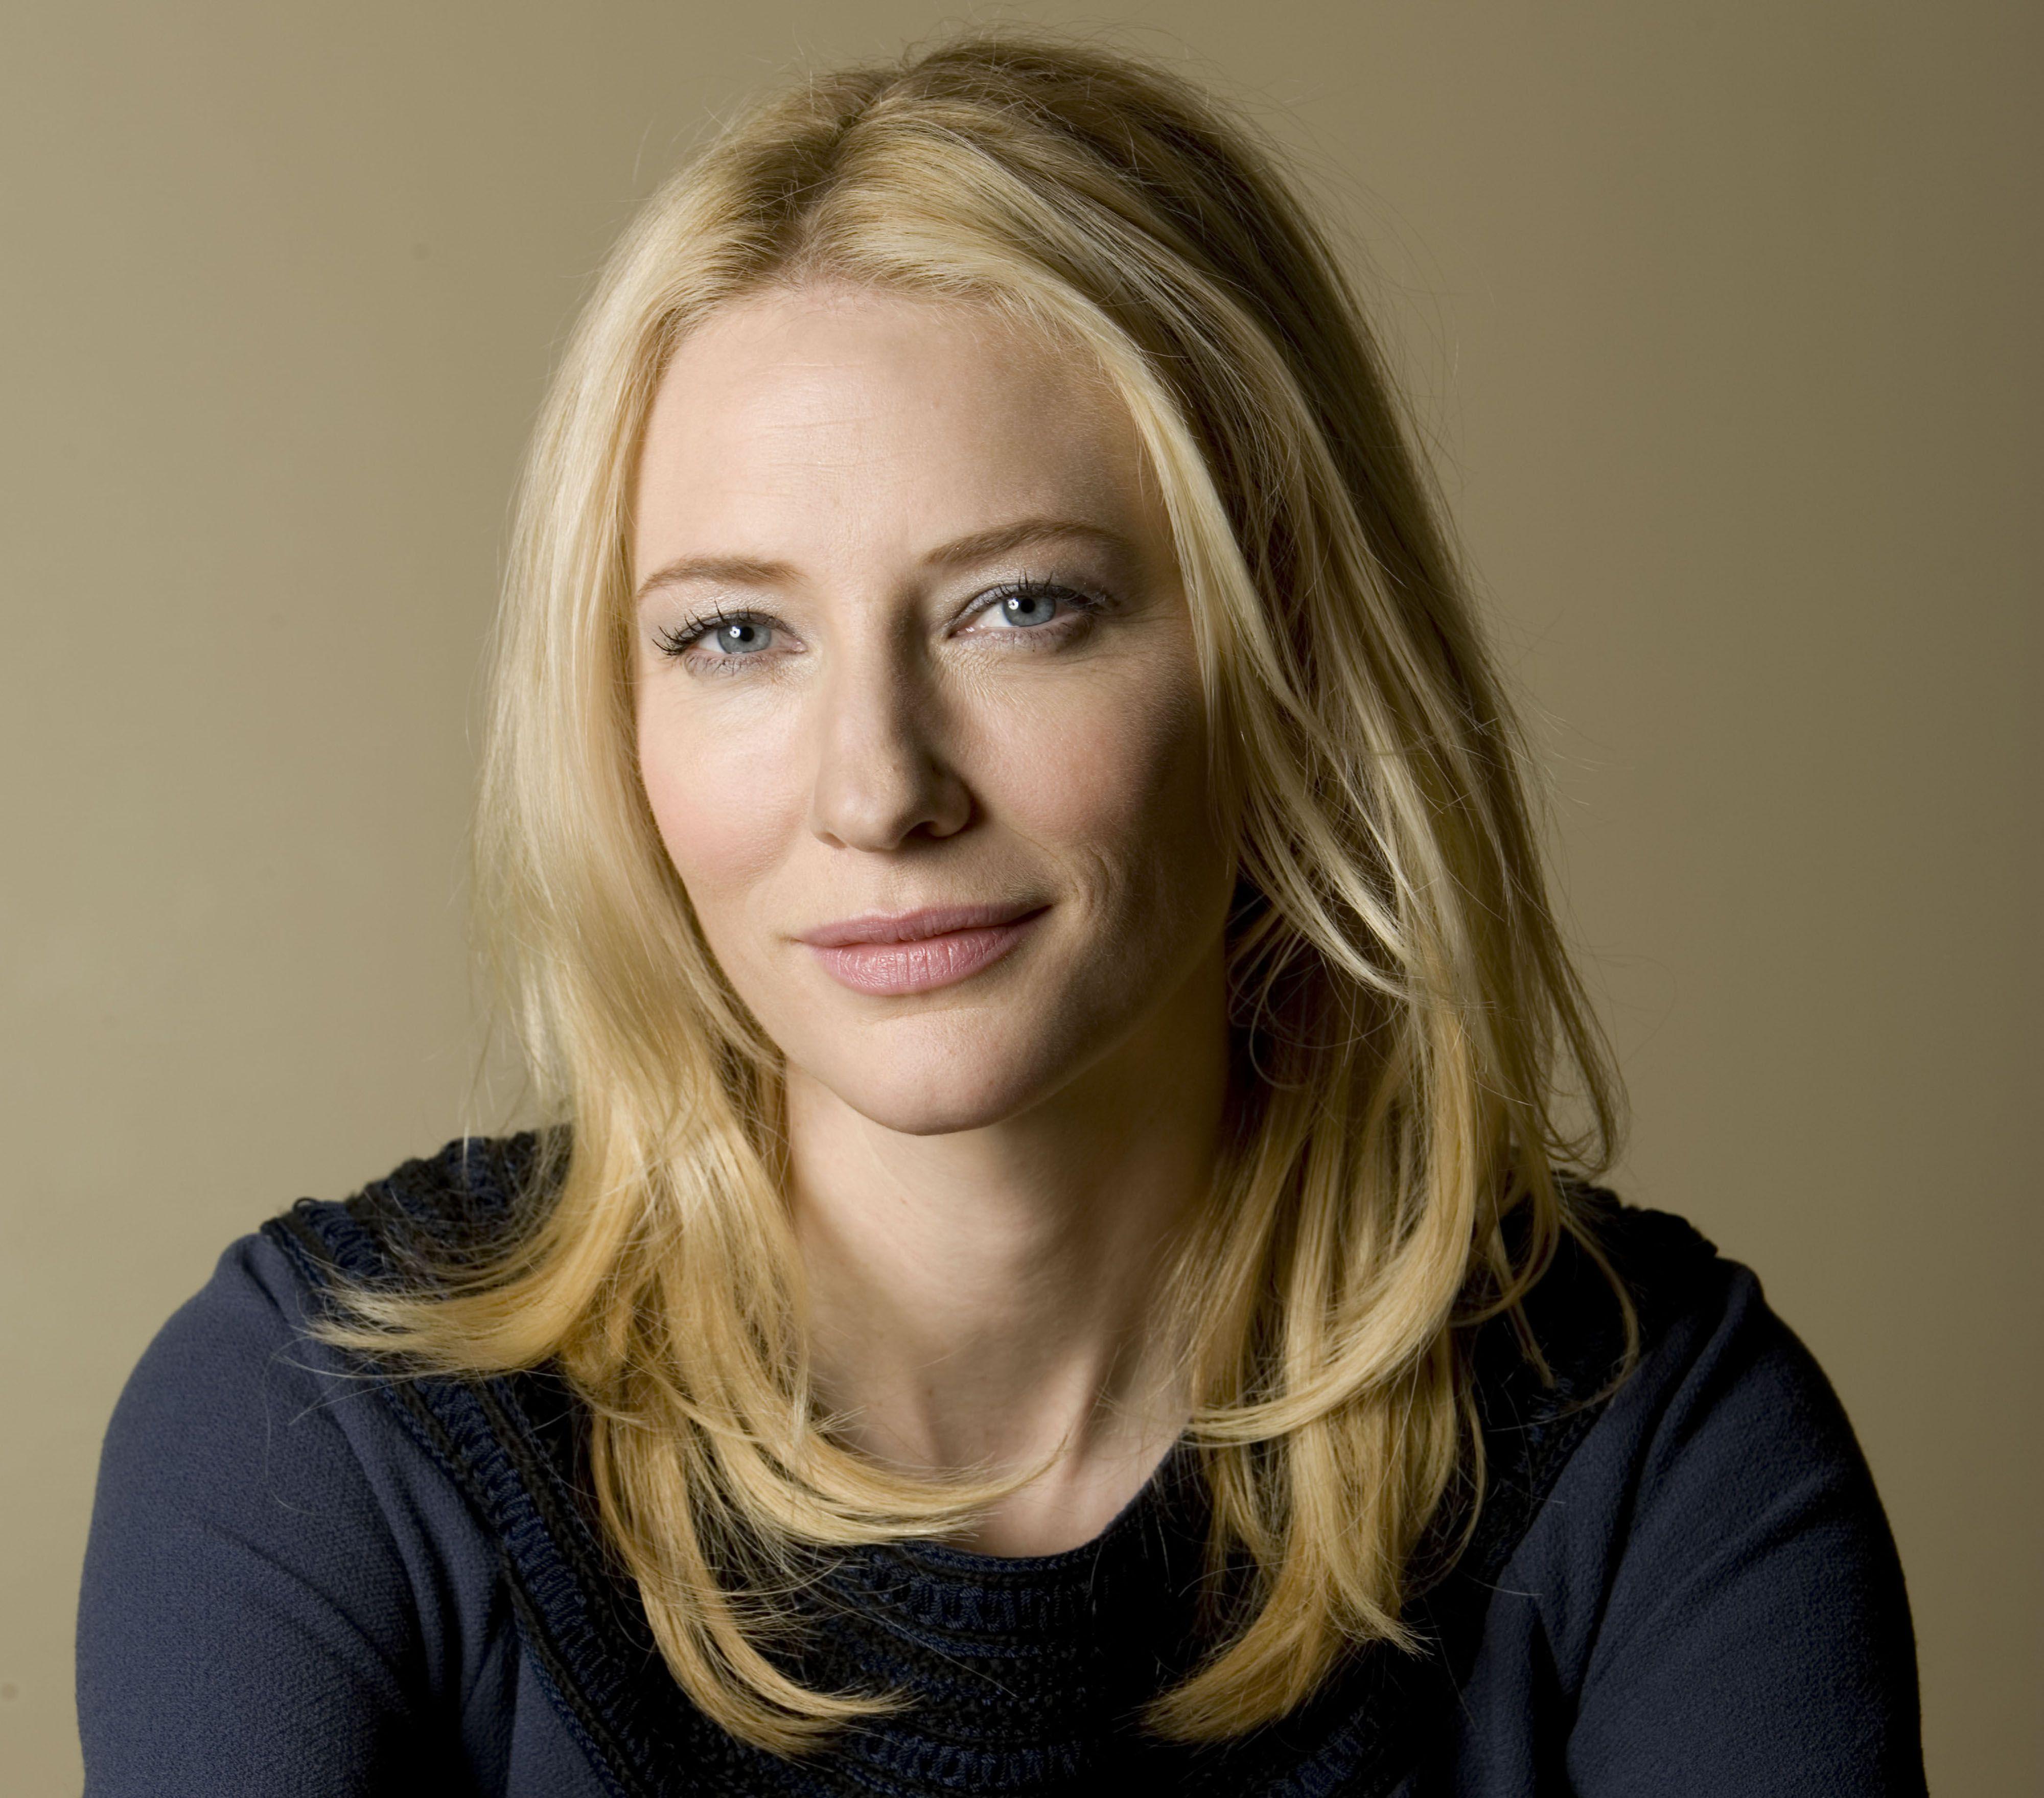 Cate Blanchett Approached For 'The House With a Clock in Its Walls